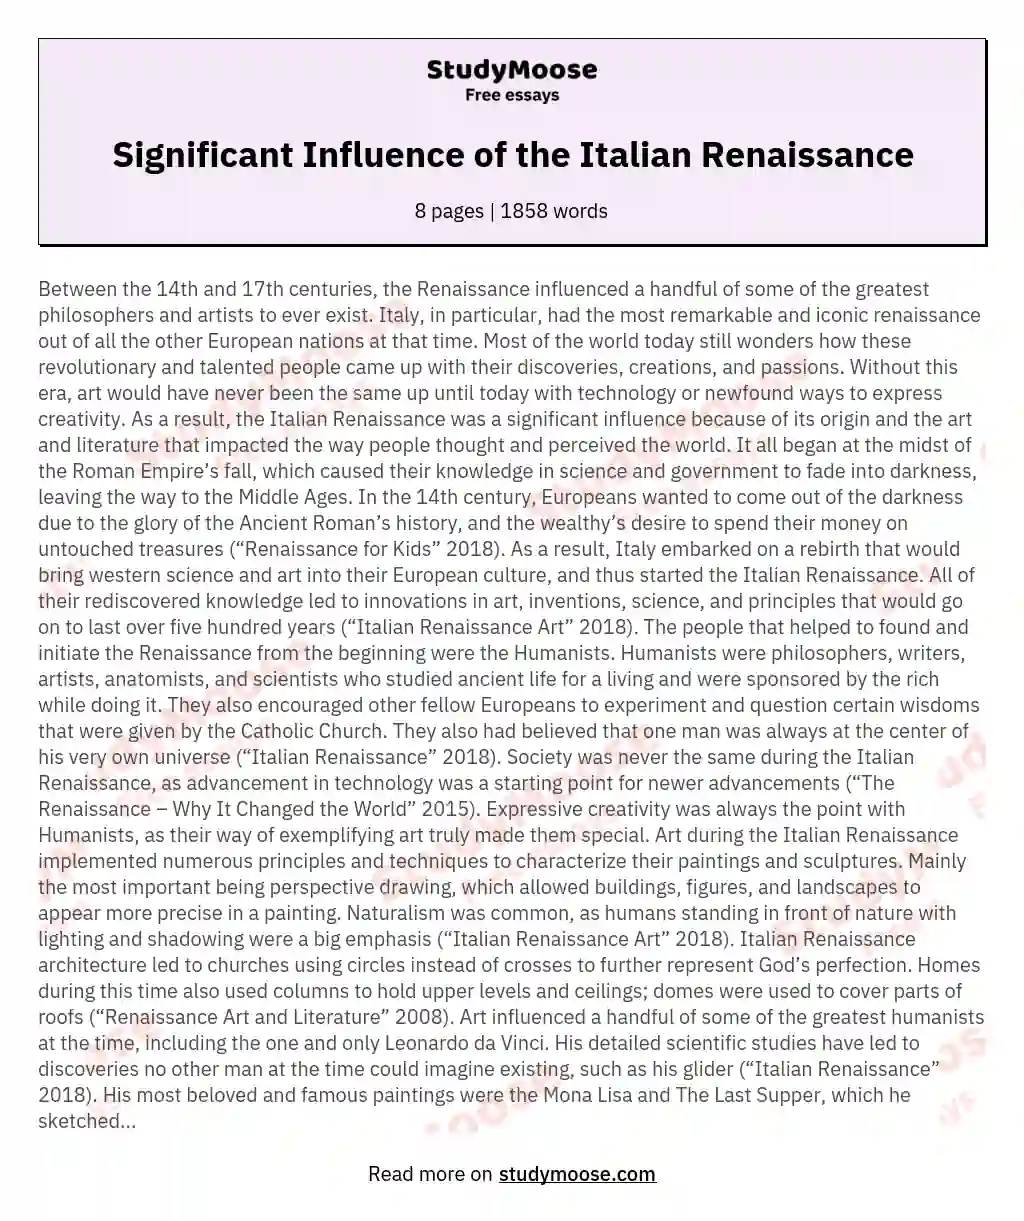 Significant Influence of the Italian Renaissance essay